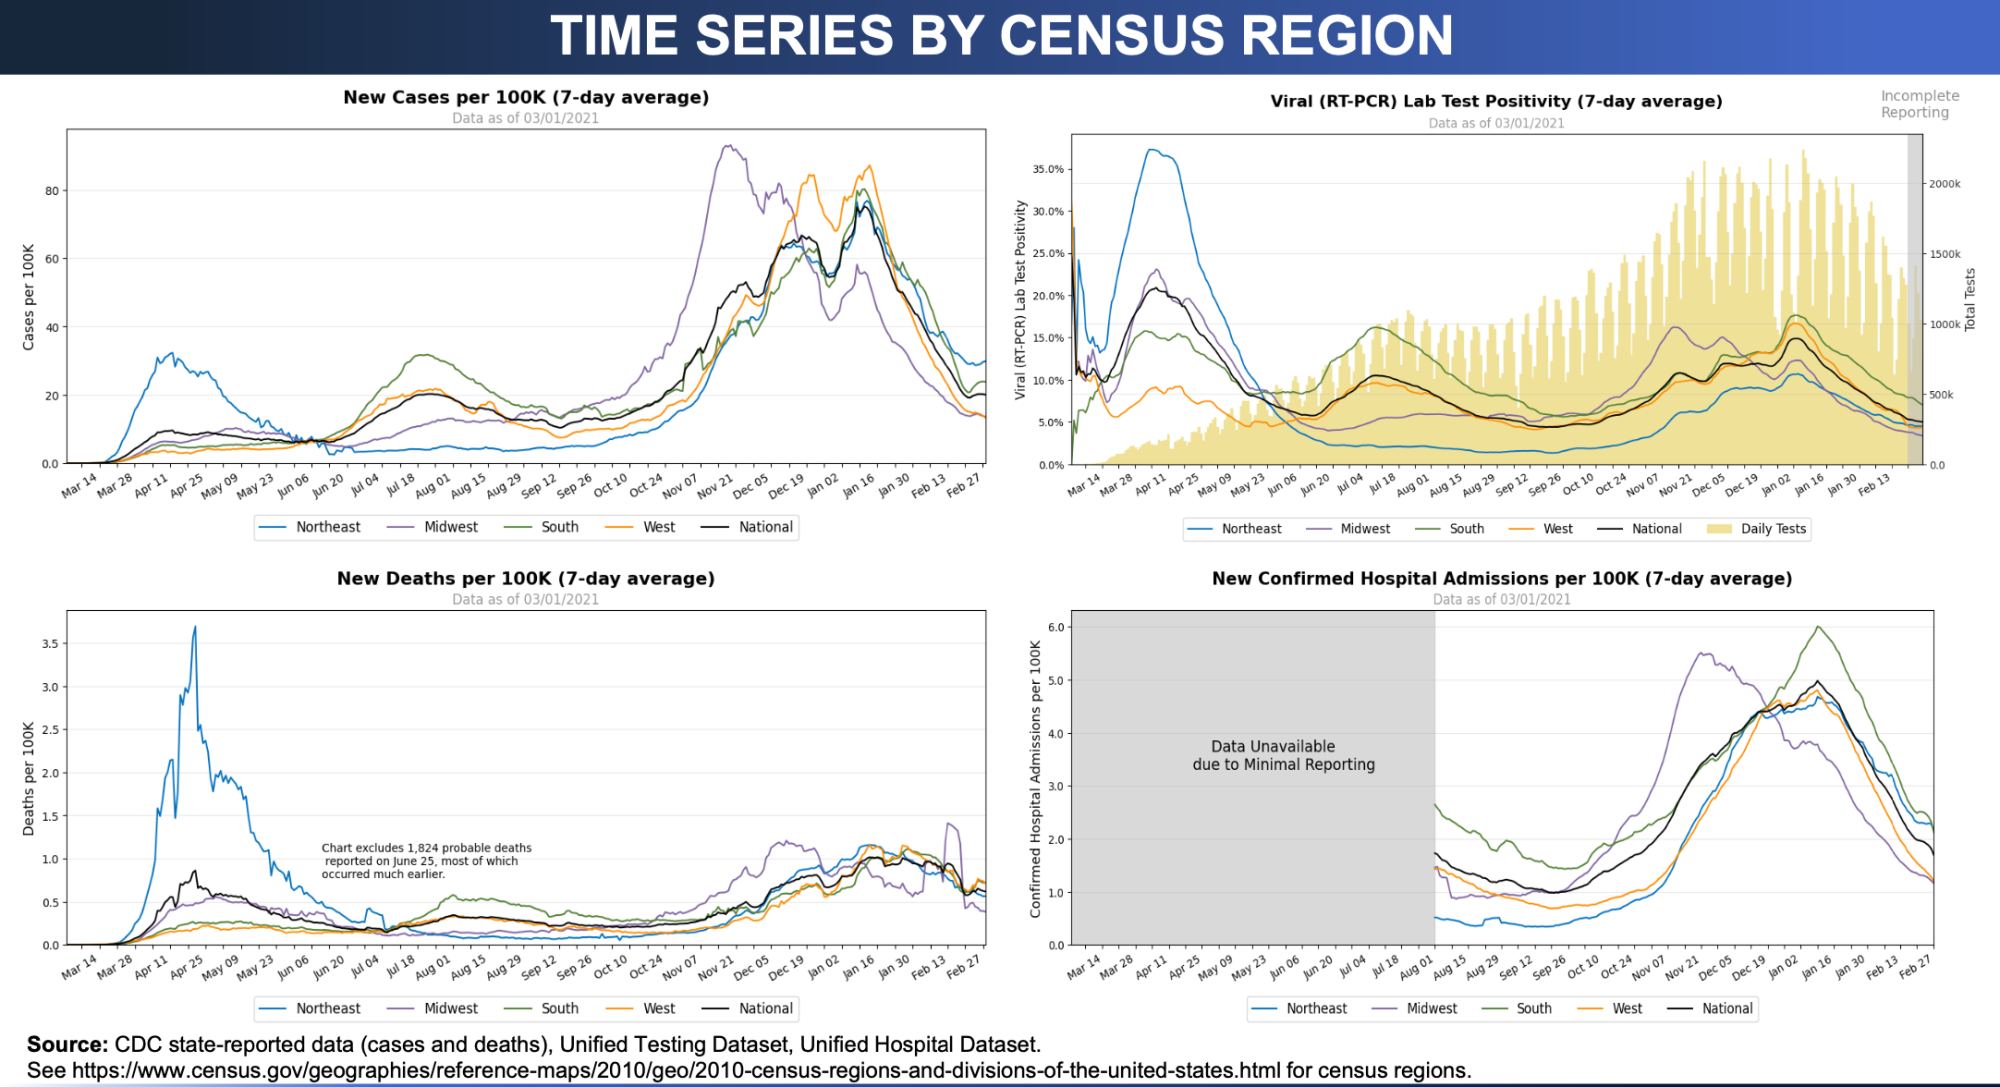 Four-panel data visualization from the federal Community Profile Reports. Each panel is a line graph showing data over time by US Census region for four metrics: new COVID-19 cases per 100,000, test positivity, new deaths per 100,000, and new hospital admissions per 100,000 over time by US Census region.